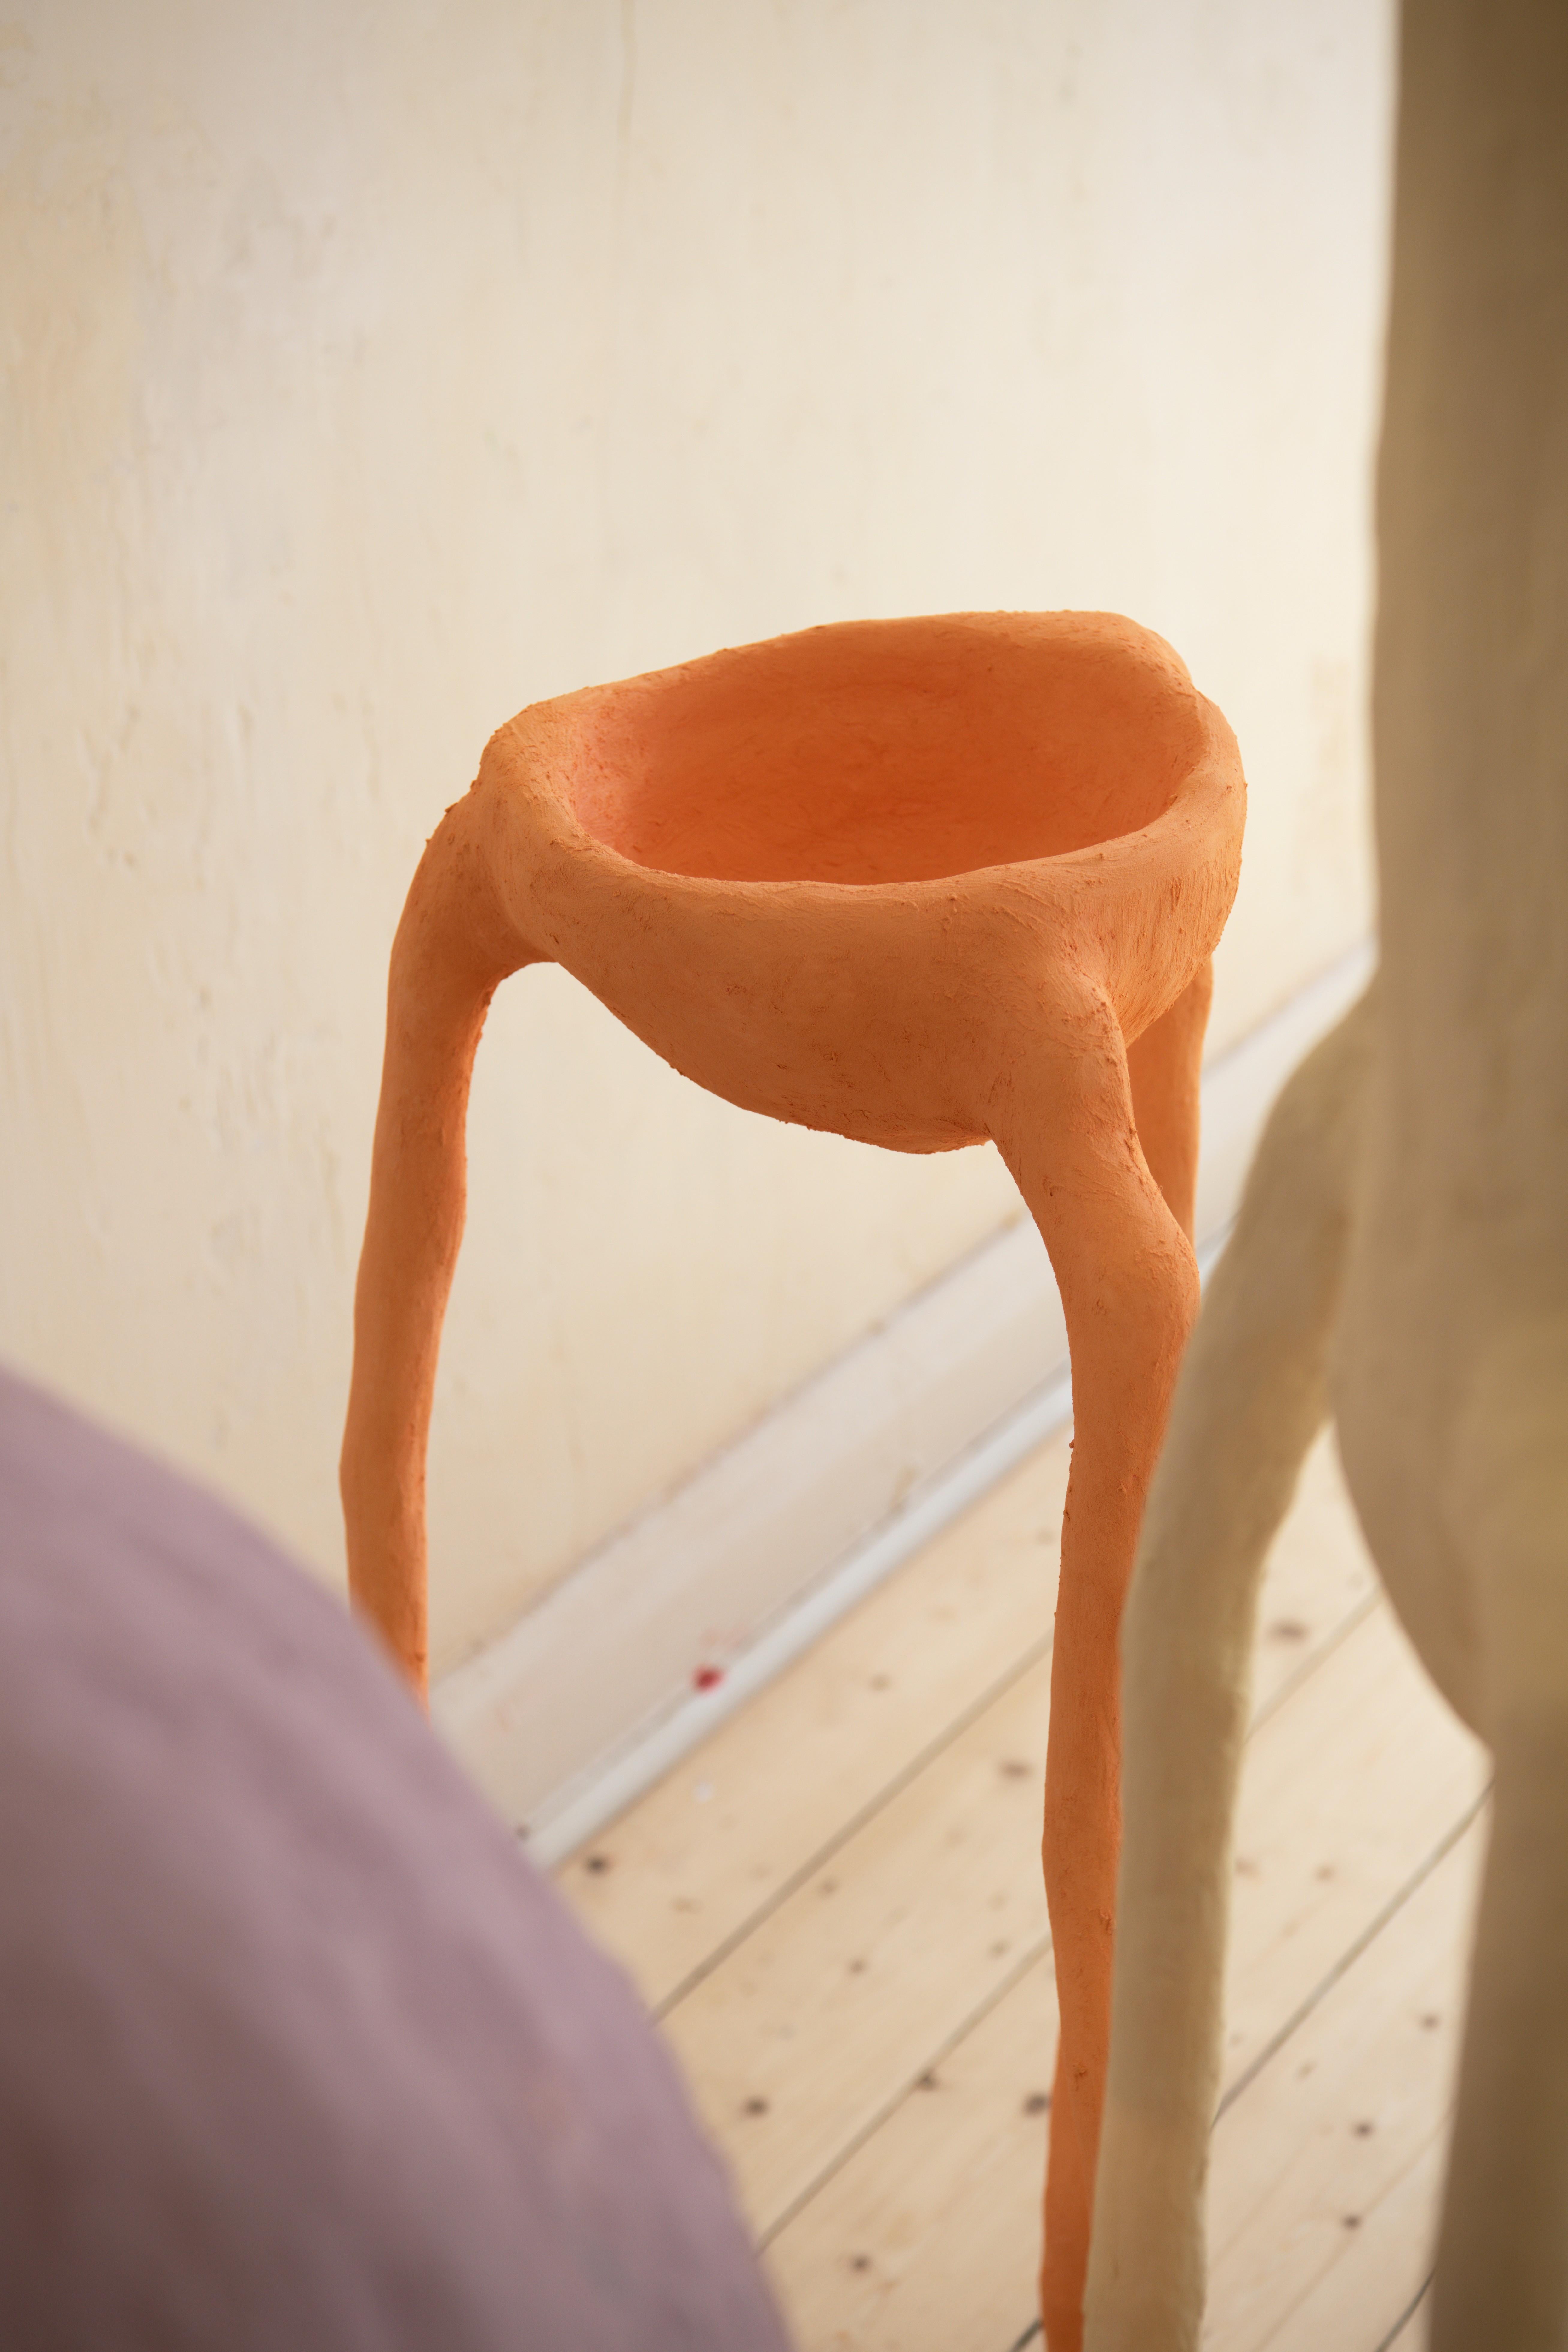 Tall Bowl originated as an imaginative attempt to find connection even when we can no longer occupy physical space together in the same way. Displaying its own free-form energy, the work is emblematic of Fleming’s experimental furniture, which gives